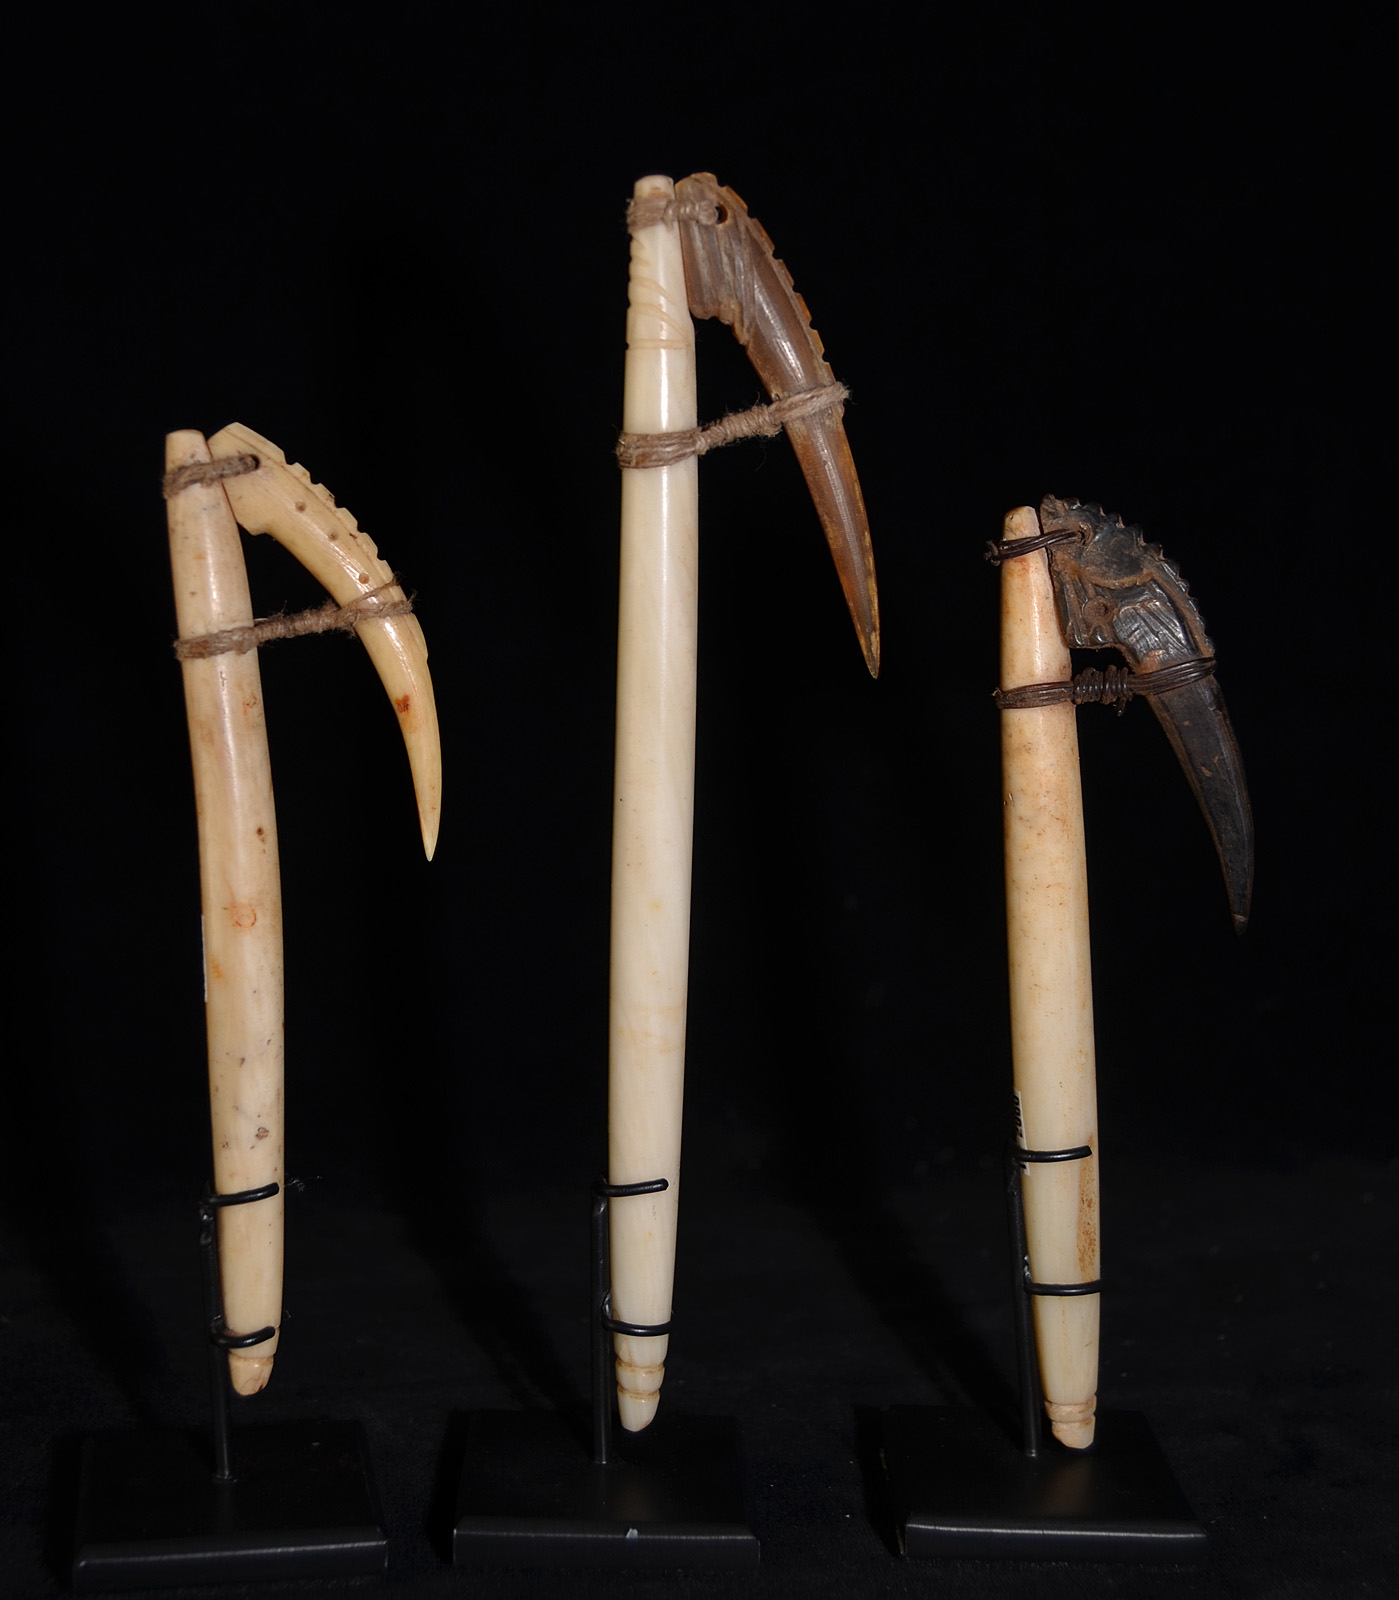 A Set of Three Old Fishing Lures, Huon Gulf Area of New Guinea 19th Century